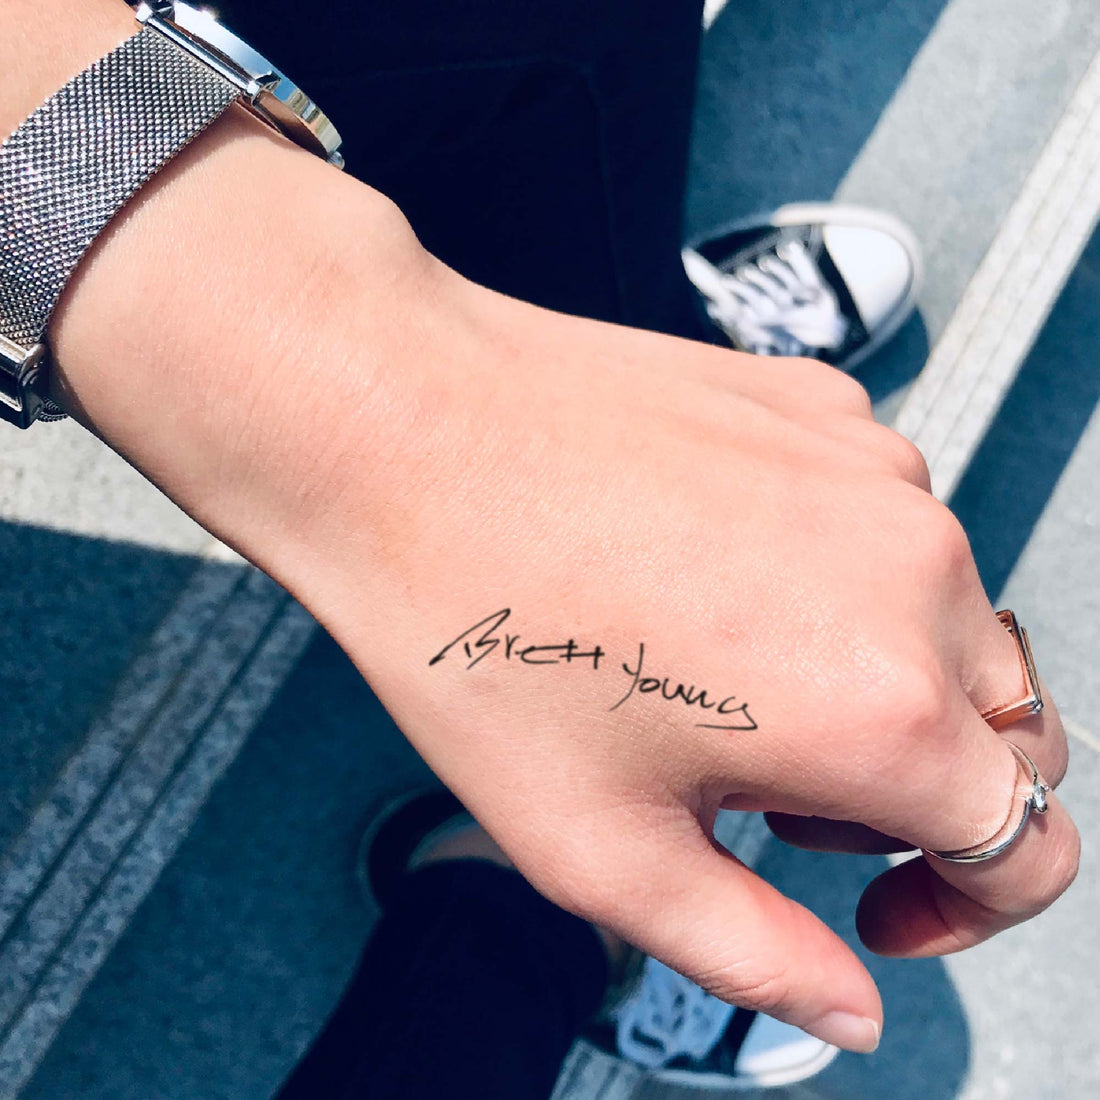 Brett Young custom temporary tattoo sticker design idea inspiration meanings removal arm wrist hand words font name signature calligraphy lyrics tour concert outfits merch accessory gift souvenir costumes wear dress up code